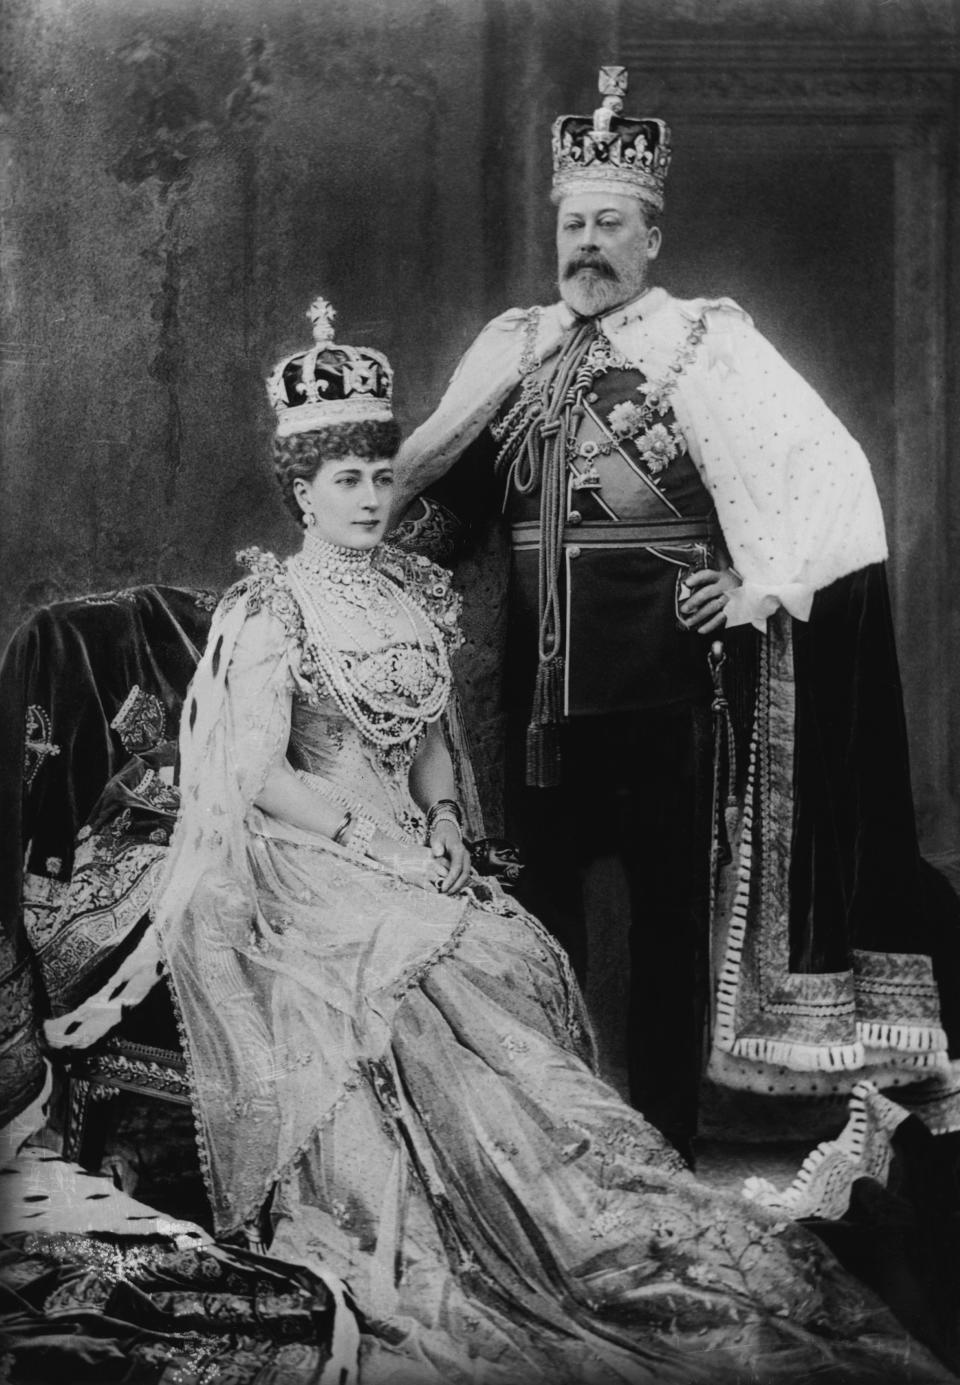 King Edward VII and Queen Alexandra pose in royal attire with crowns and elaborate robes, showcasing regal elegance in a formal portrait